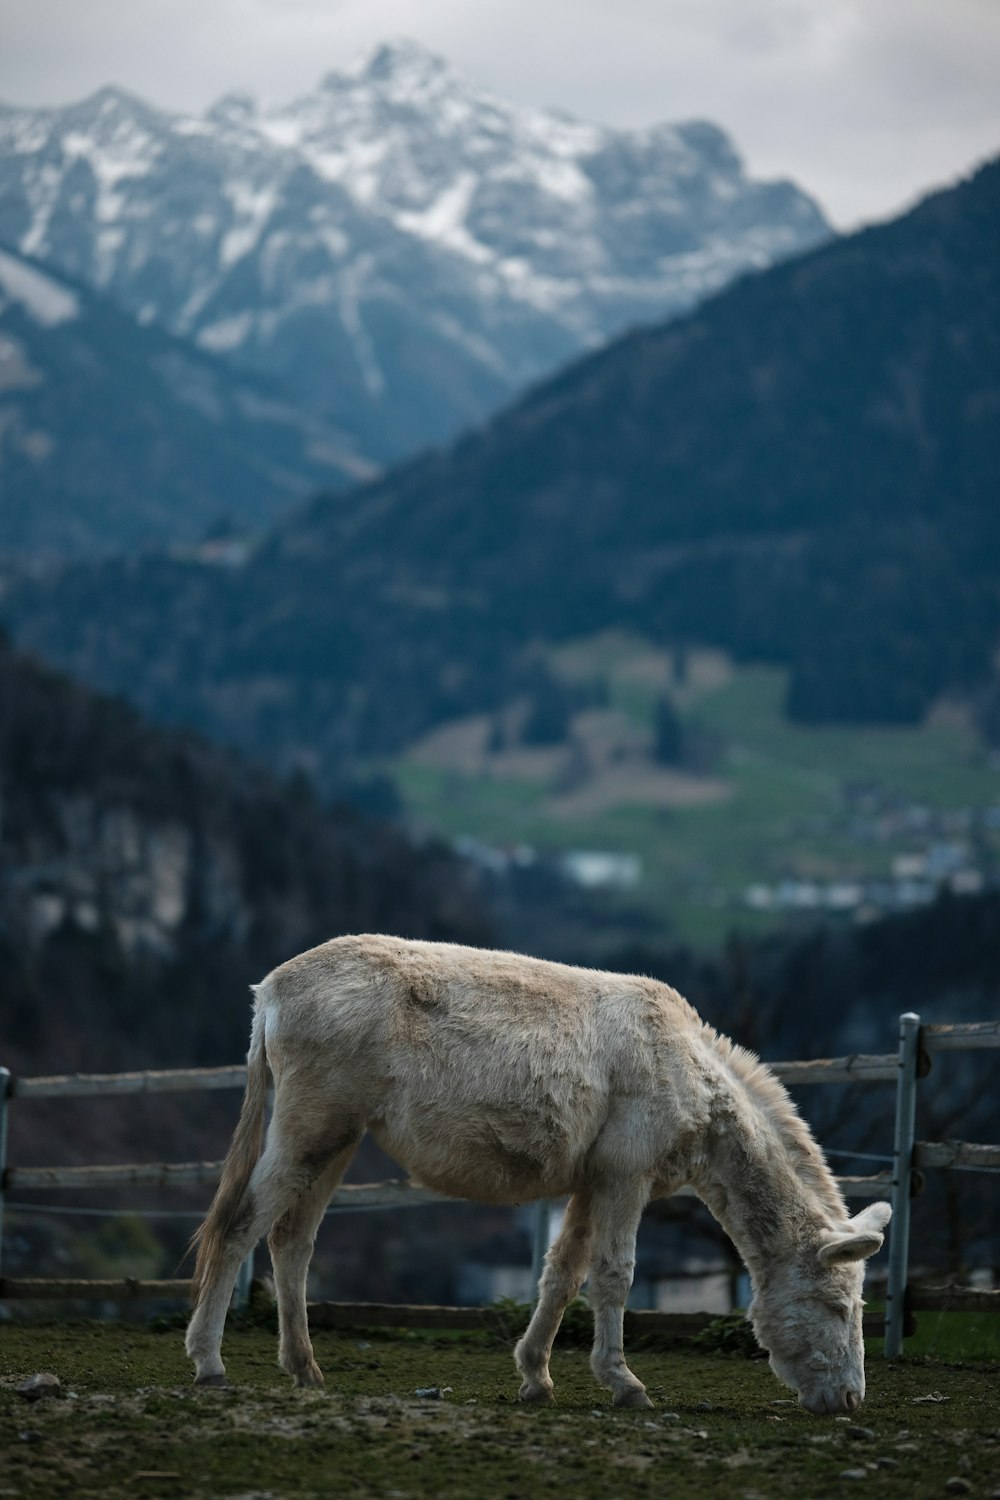 a white horse grazing in a field with mountains in the background